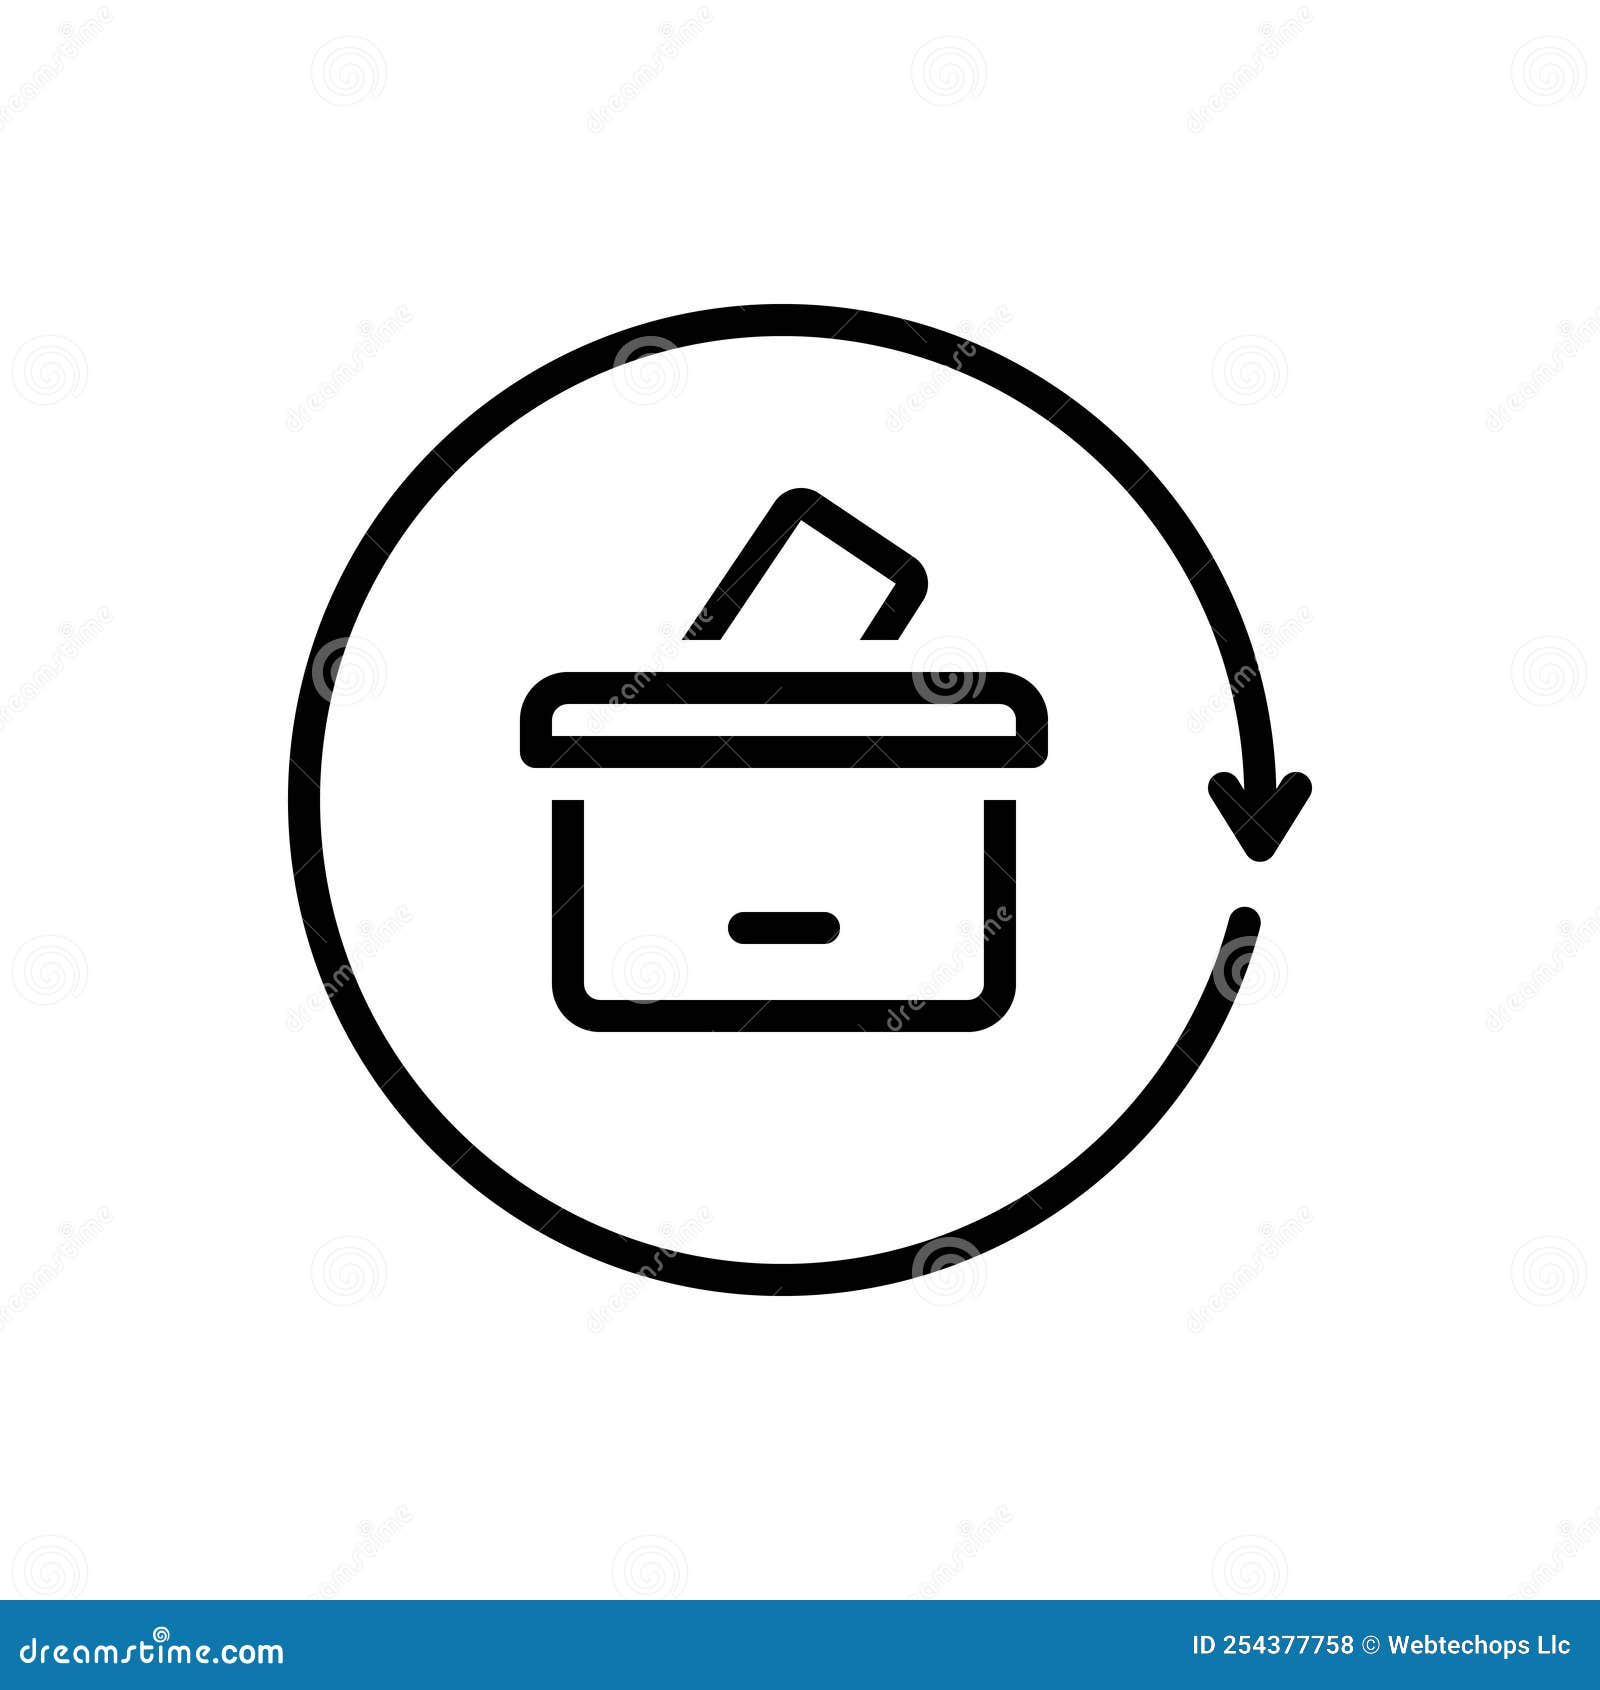 black line icon for electoral, elect and elective